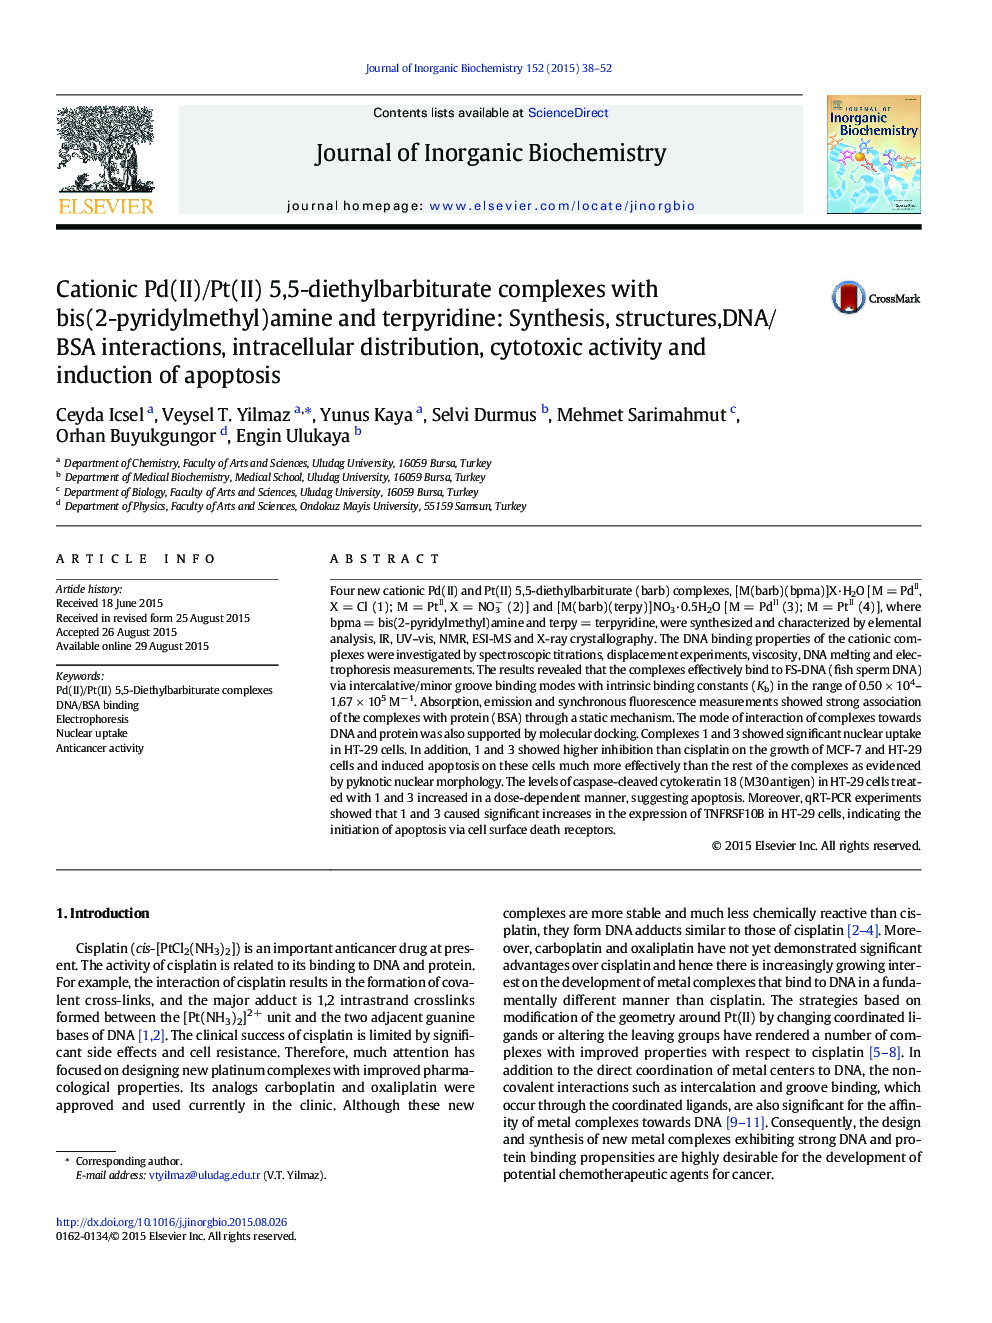 Cationic Pd(II)/Pt(II) 5,5-diethylbarbiturate complexes with bis(2-pyridylmethyl)amine and terpyridine: Synthesis, structures,DNA/BSA interactions, intracellular distribution, cytotoxic activity and induction of apoptosis